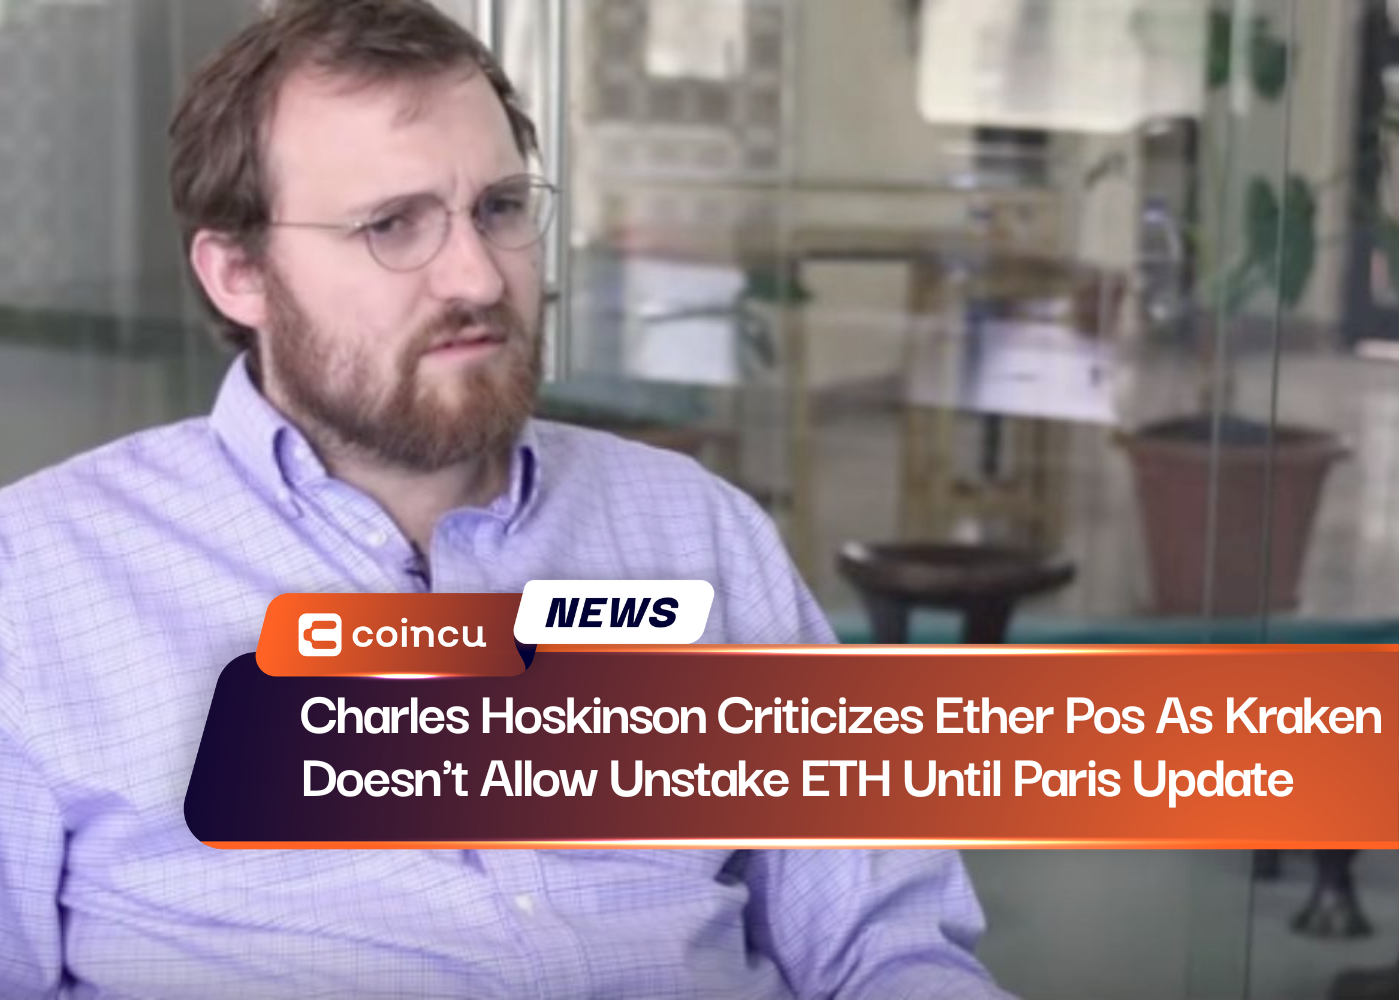 Charles Hoskinson Criticizes Ether Pos As Kraken Doesn't Allow Unstake ETH Until Paris Update